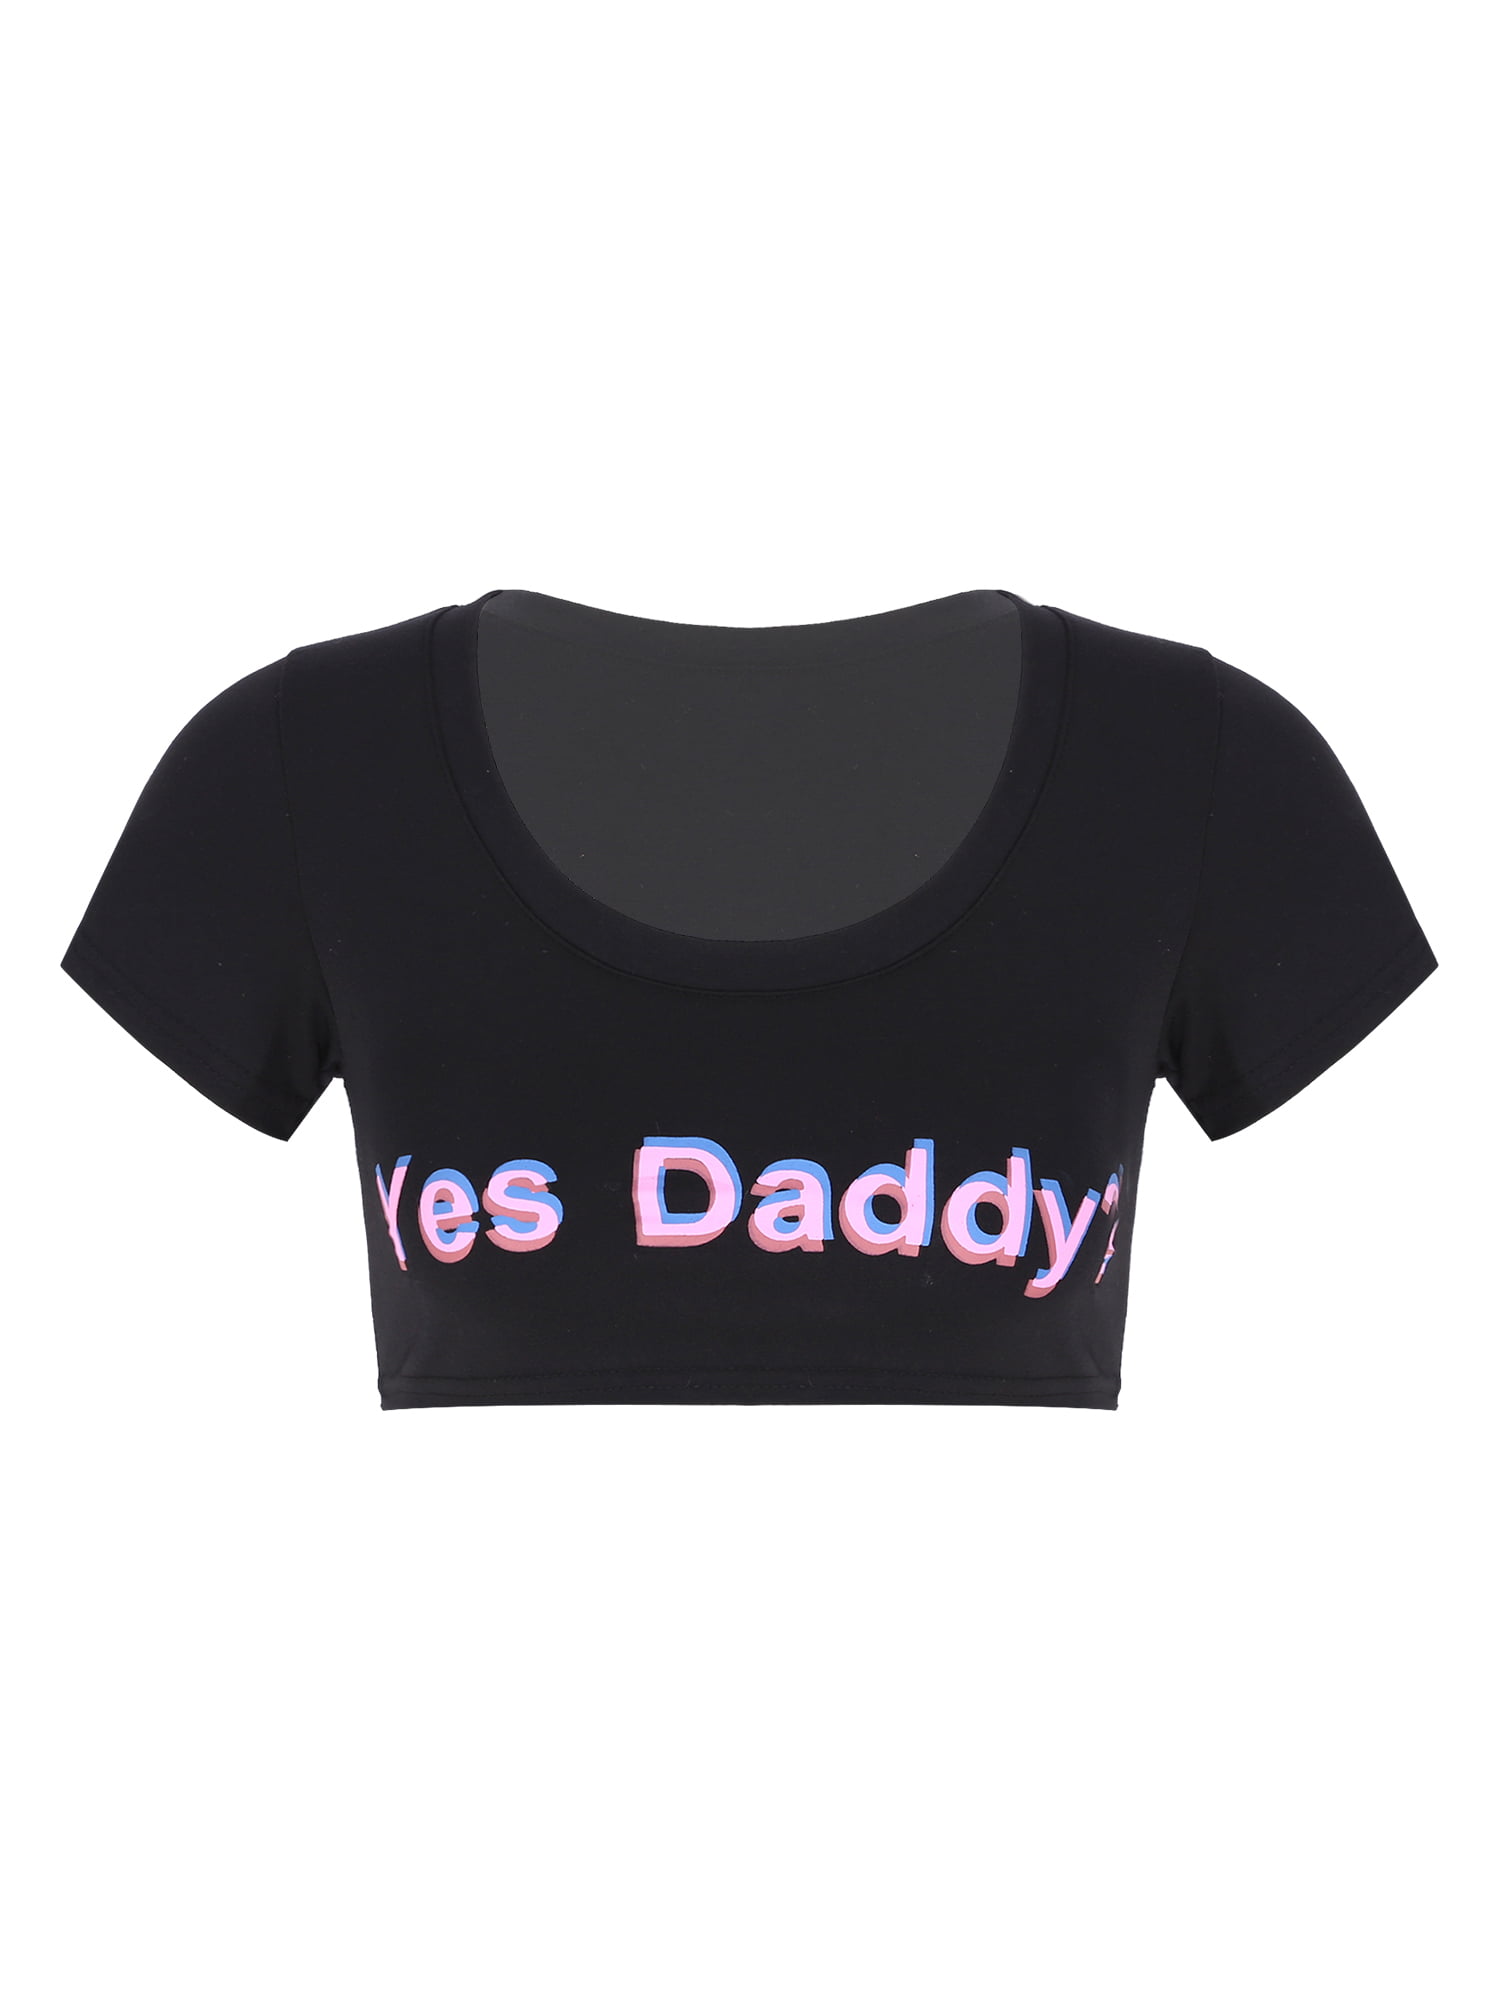 Sexy Women Tank Top Yes Daddy Print Letter Short Sleeve Blouse Crop Tops  T-Shirt